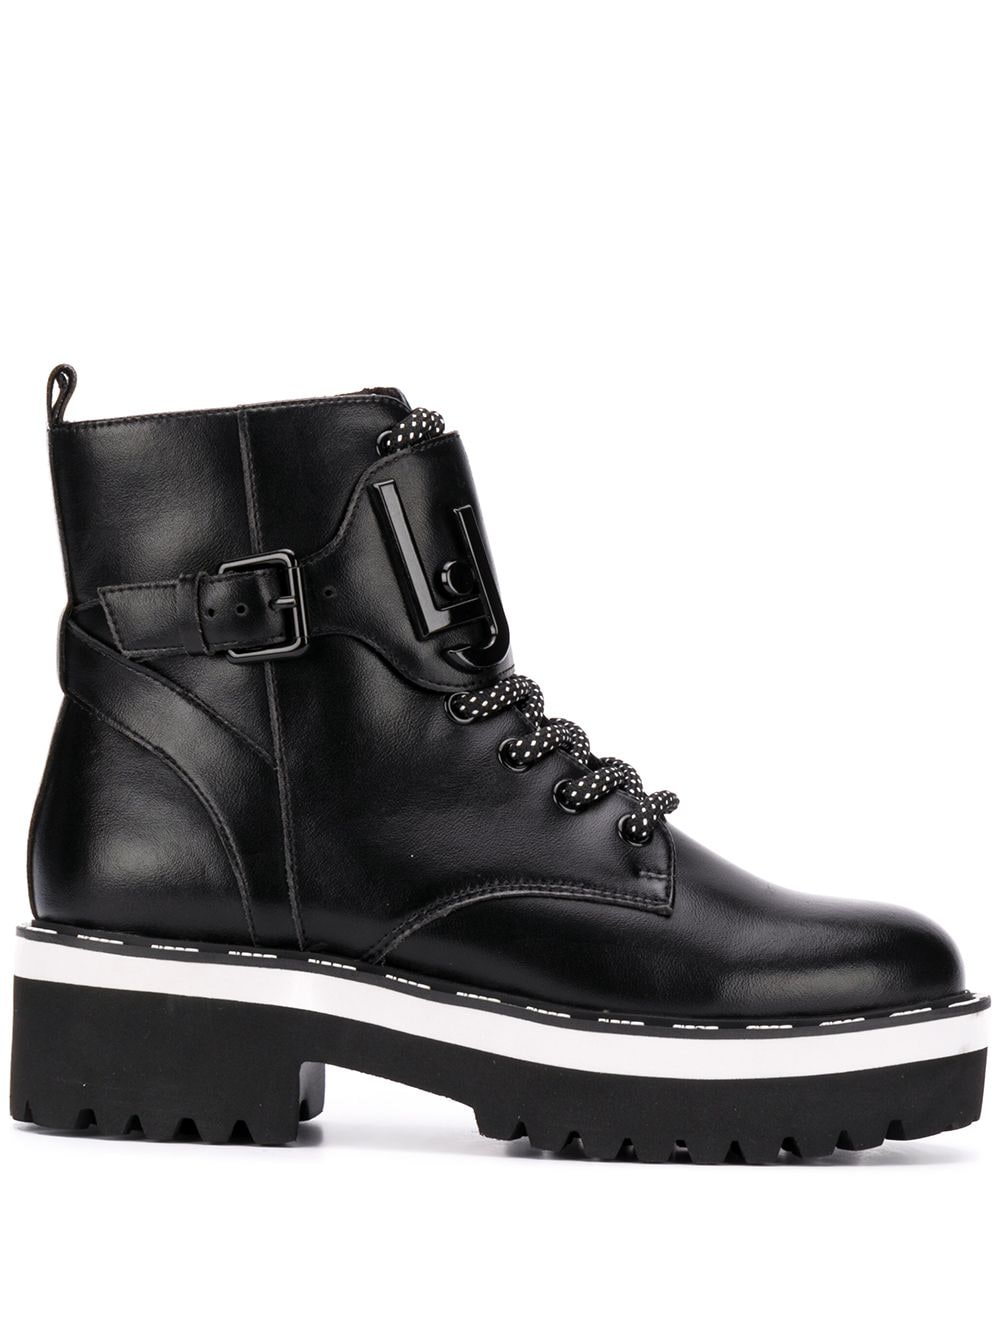 lace up ankle boots sale